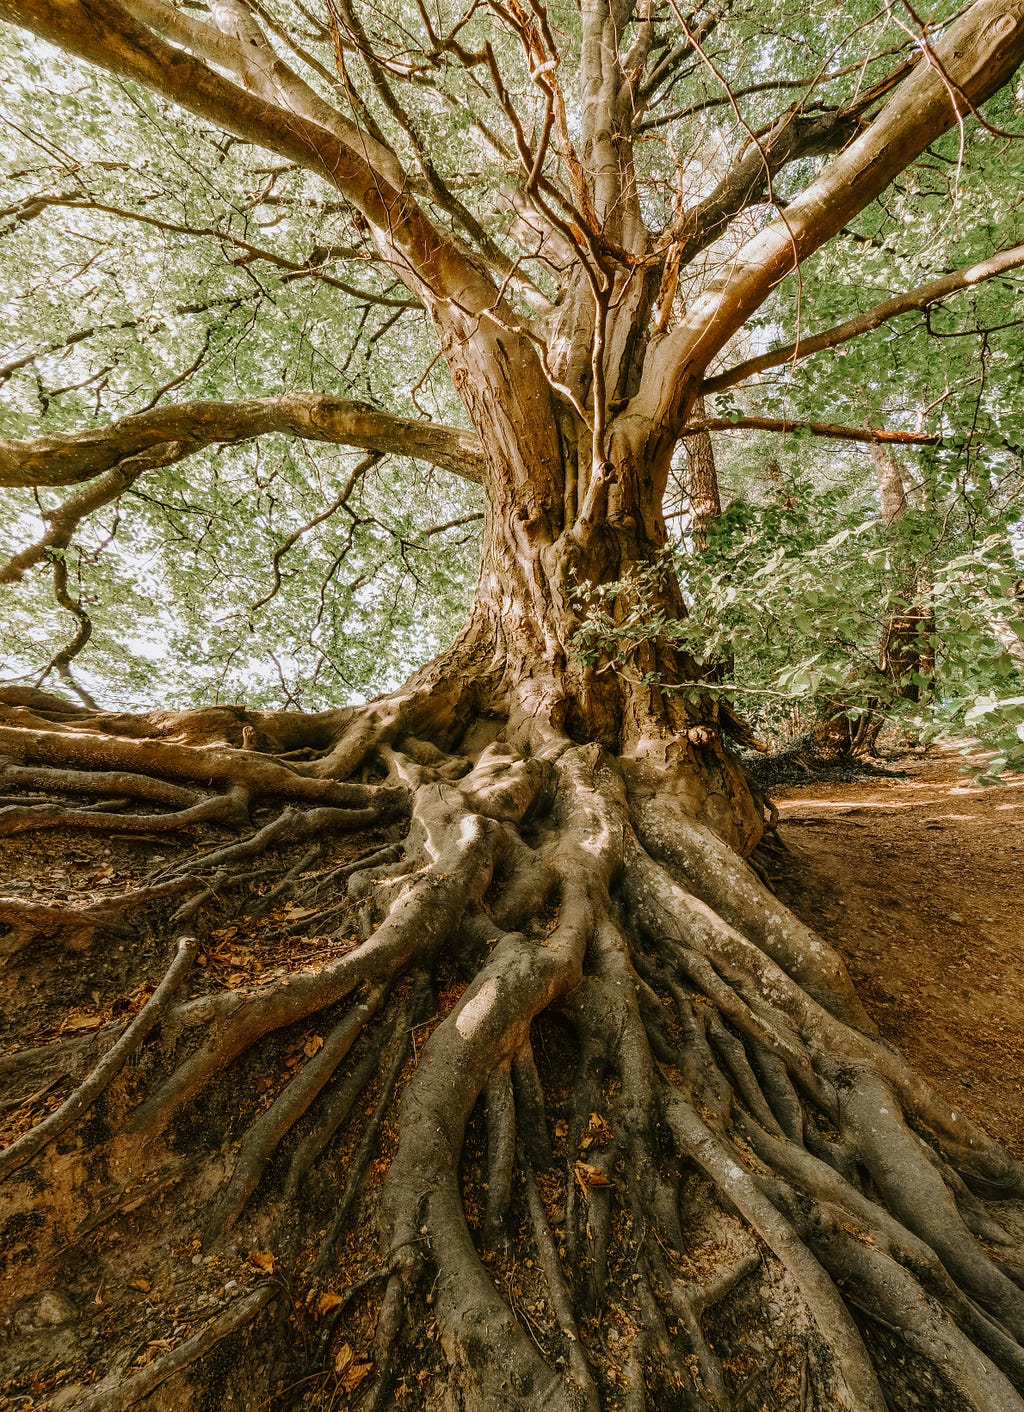 Beautiful, ancient tree with many roots above the ground.